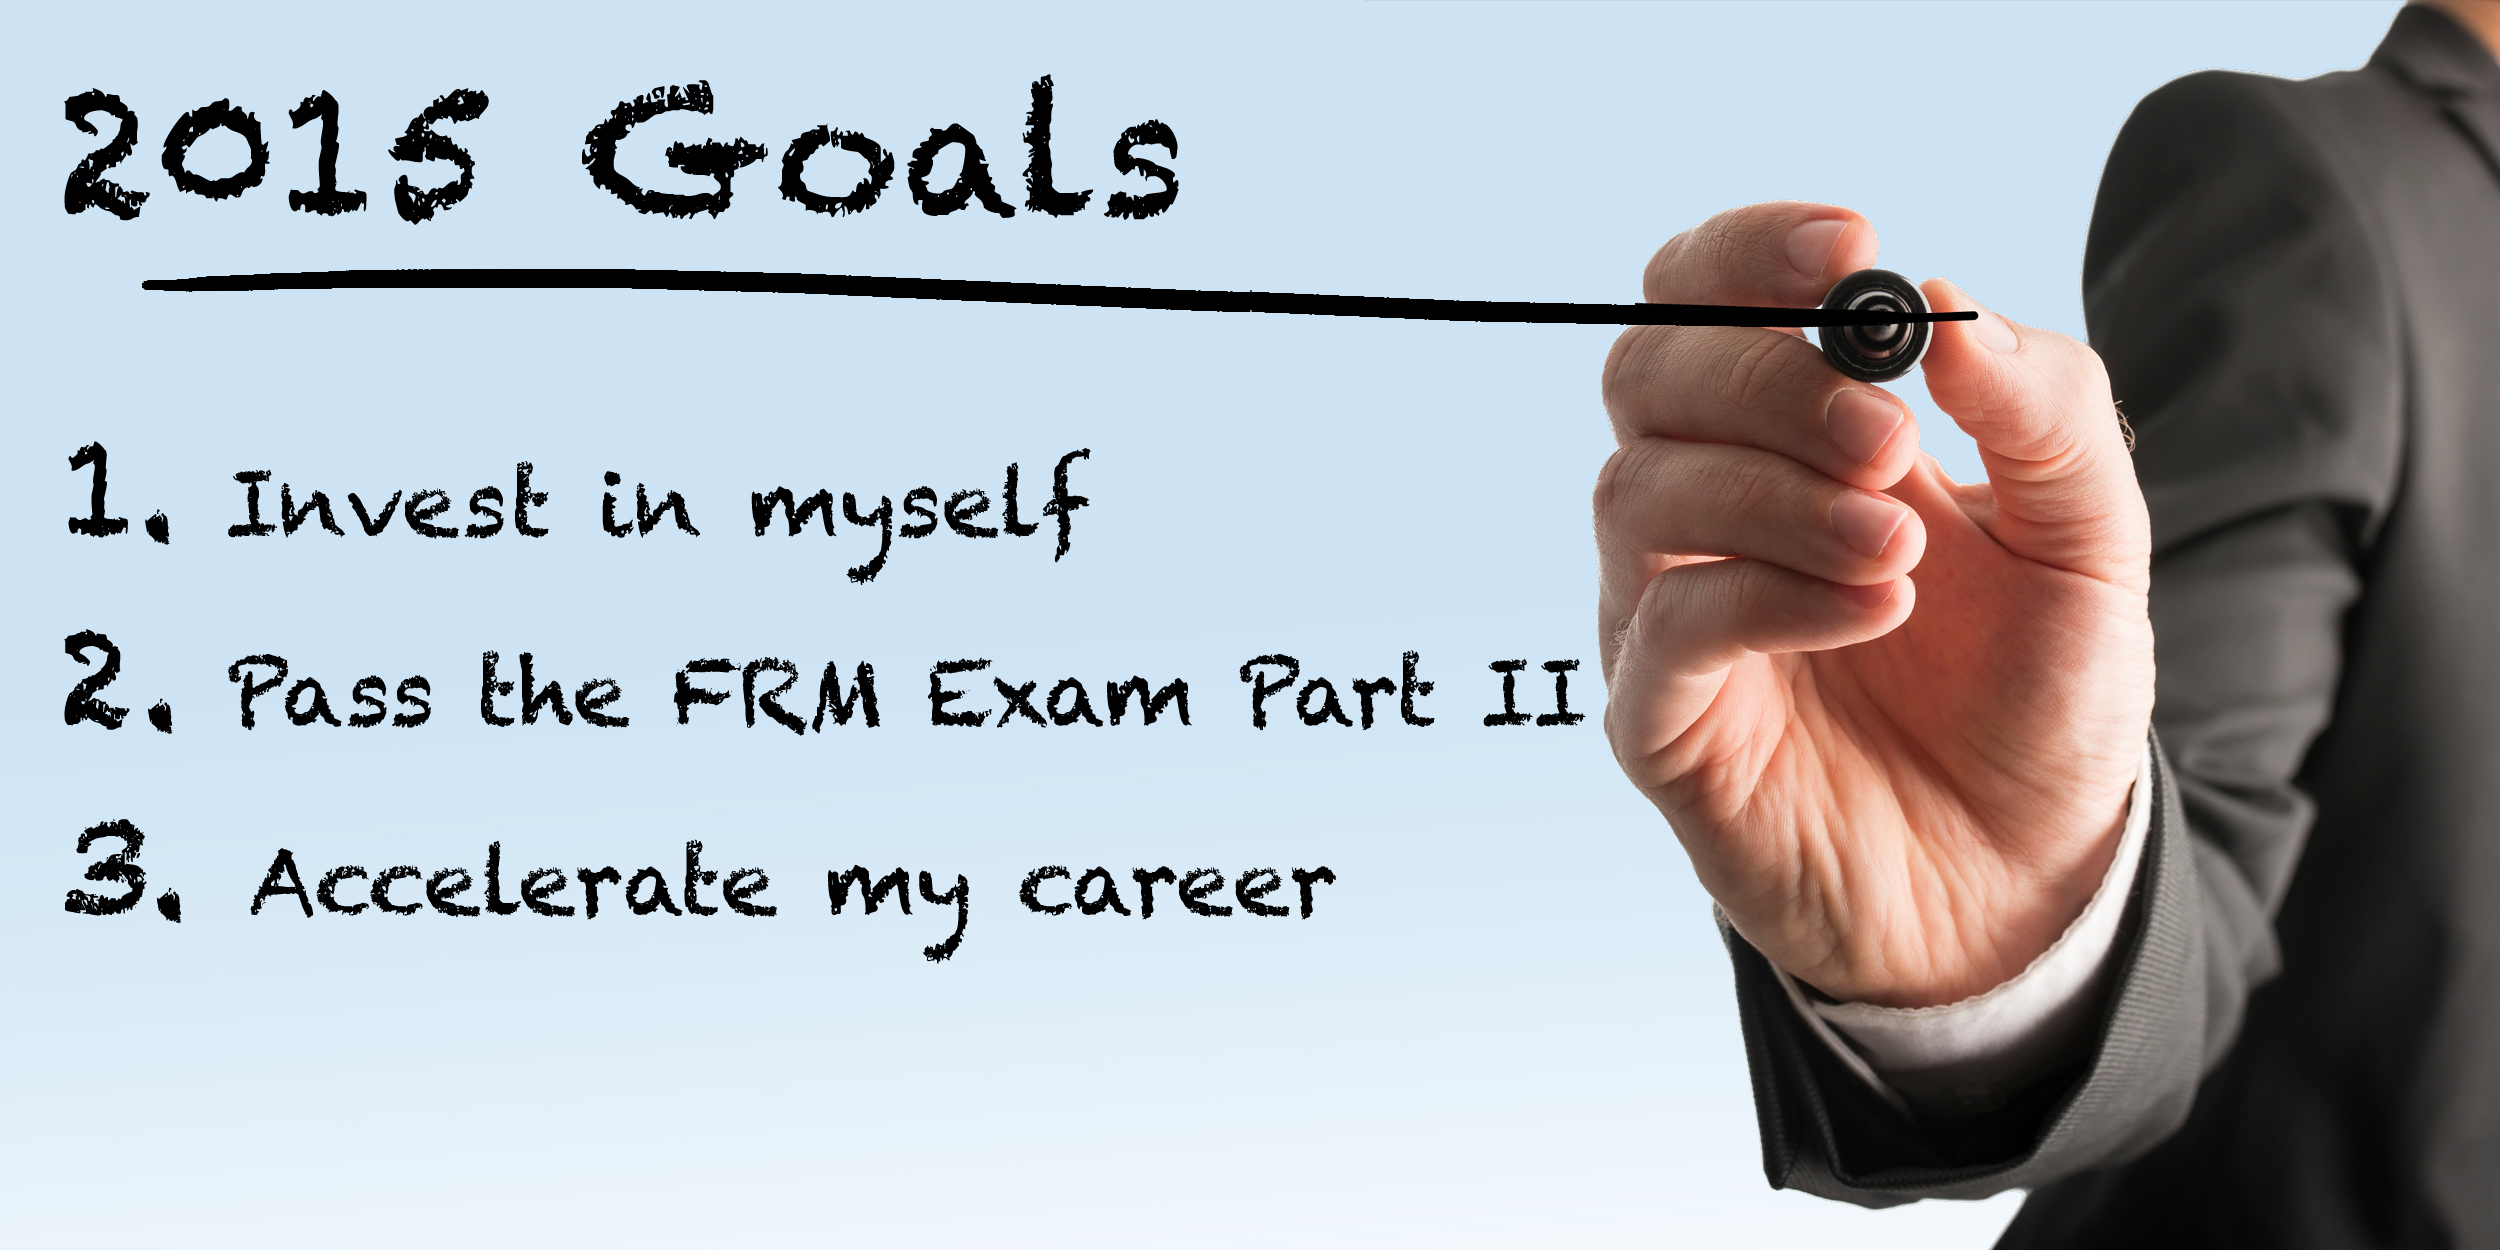 2015 Goals
1. Invest in myself
2. Pass the FRM Exam Part II
3. Accelerate my career